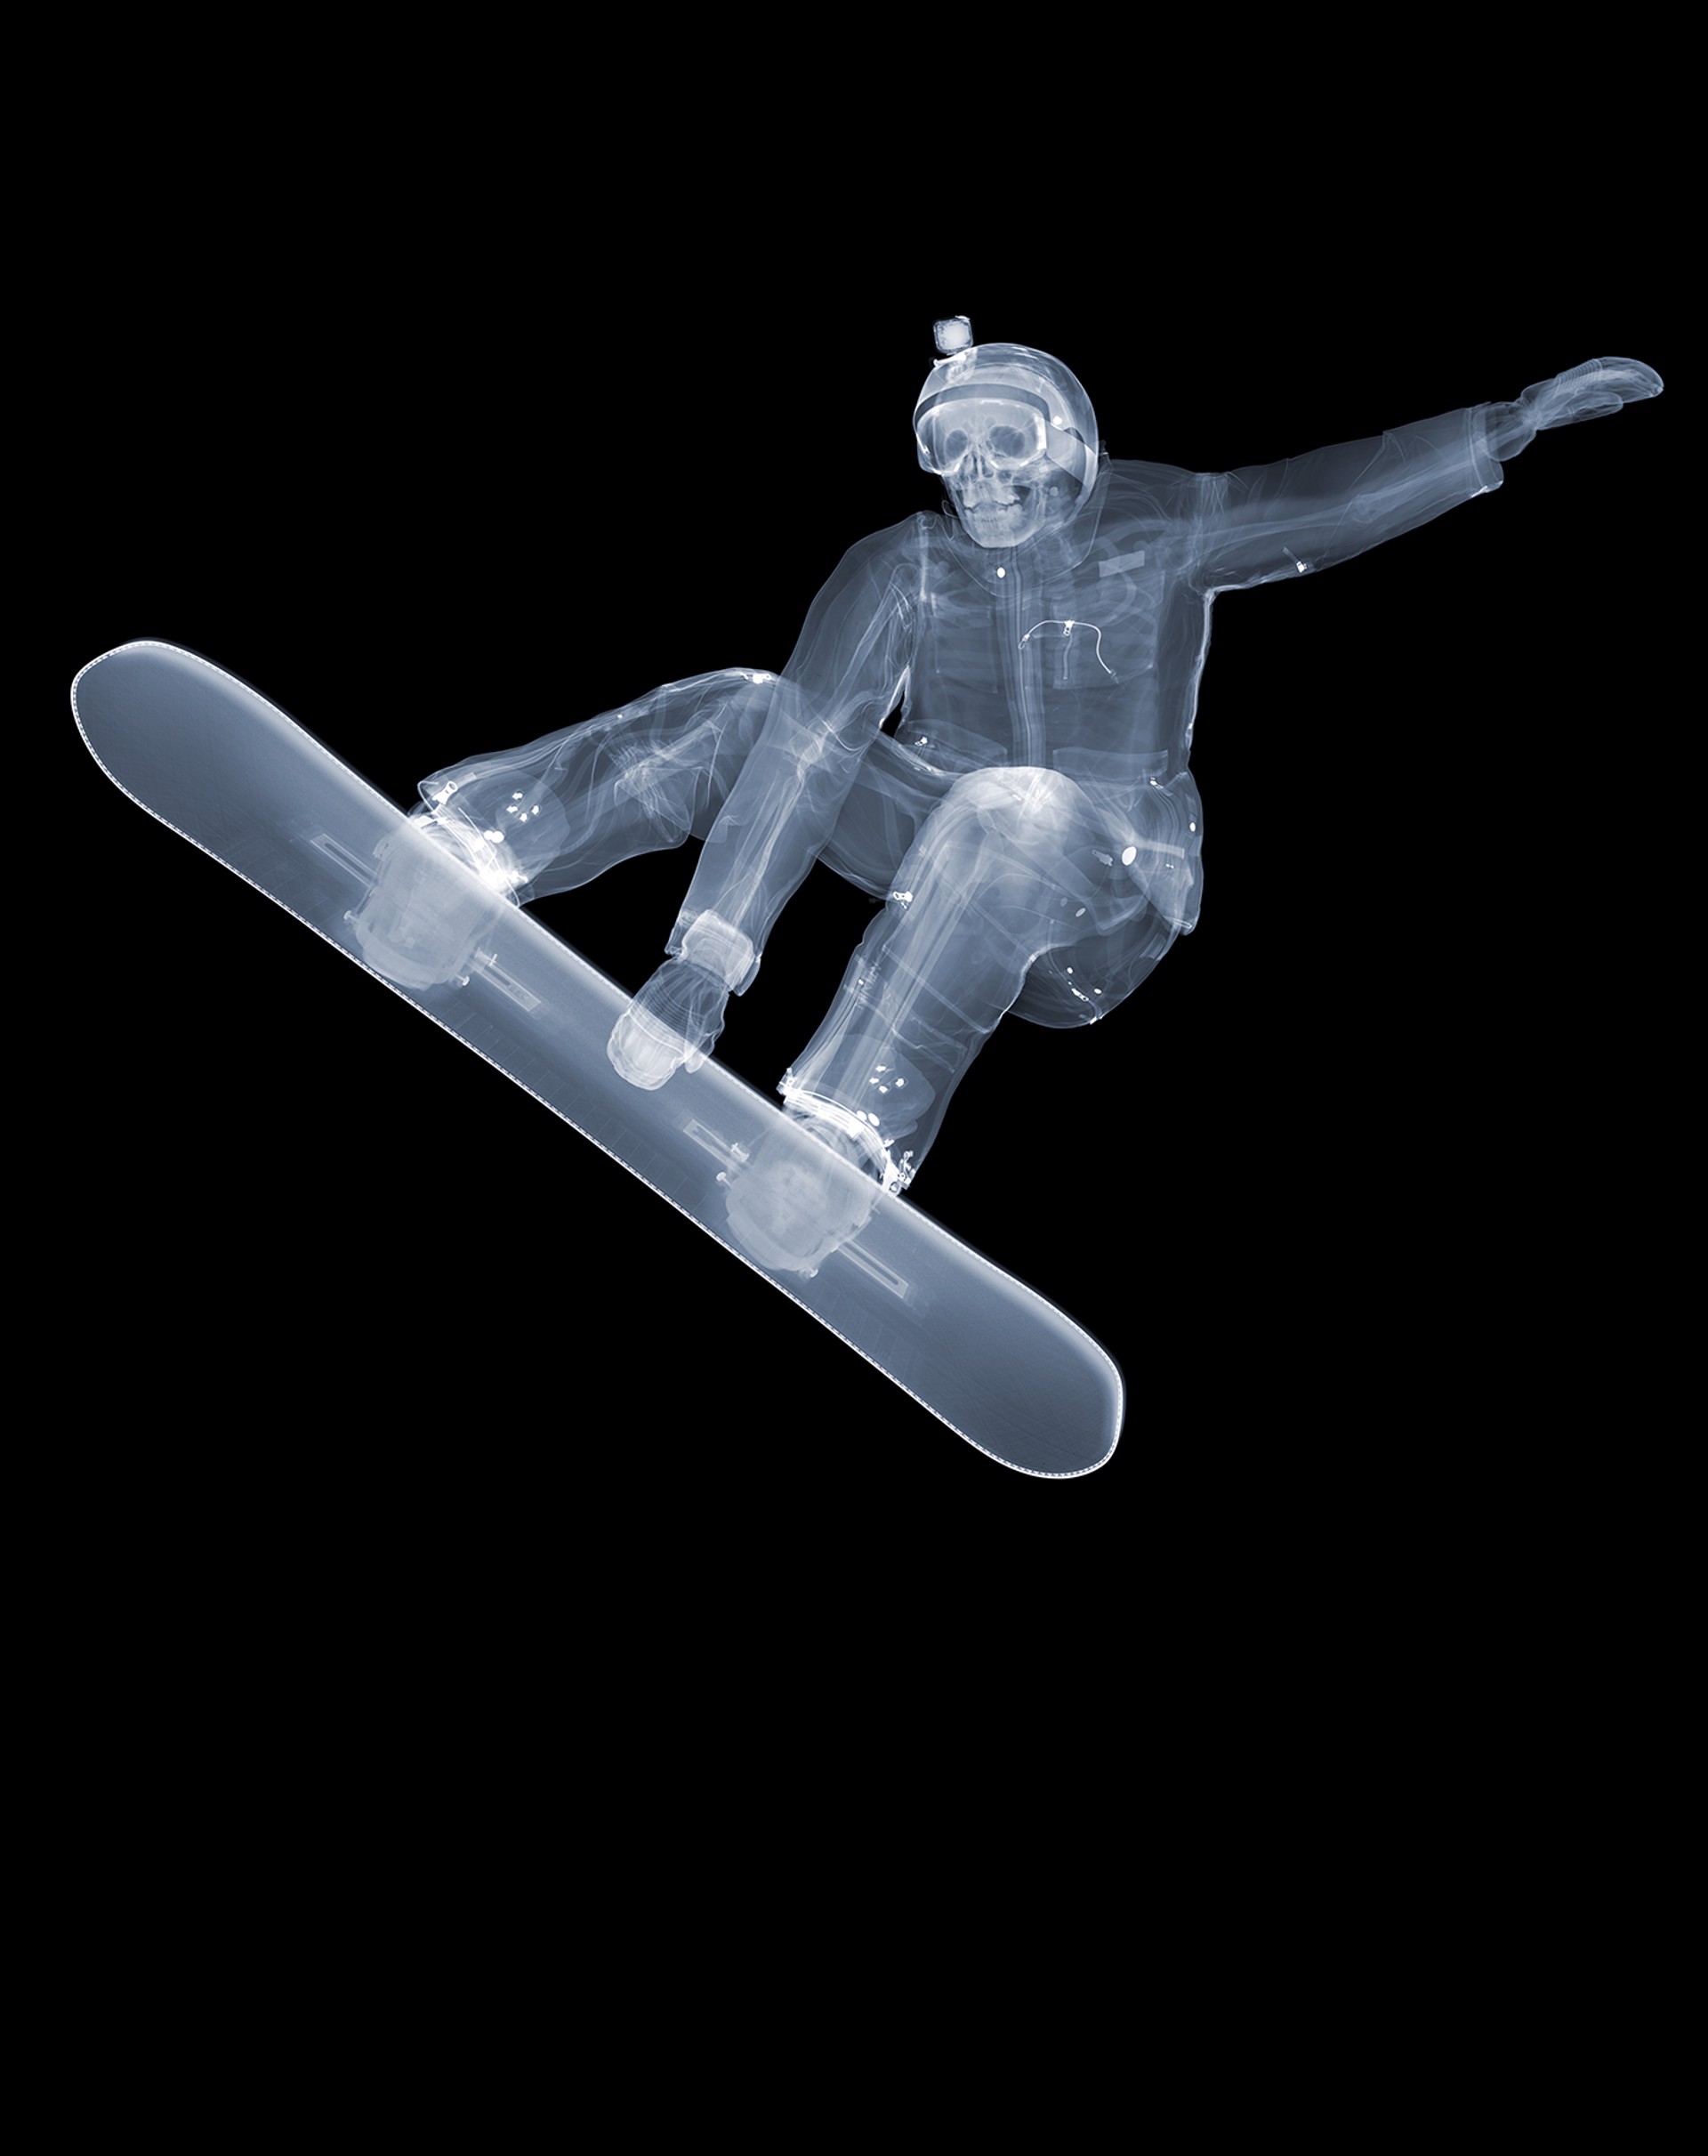 Snowboarder by Nick Veasey